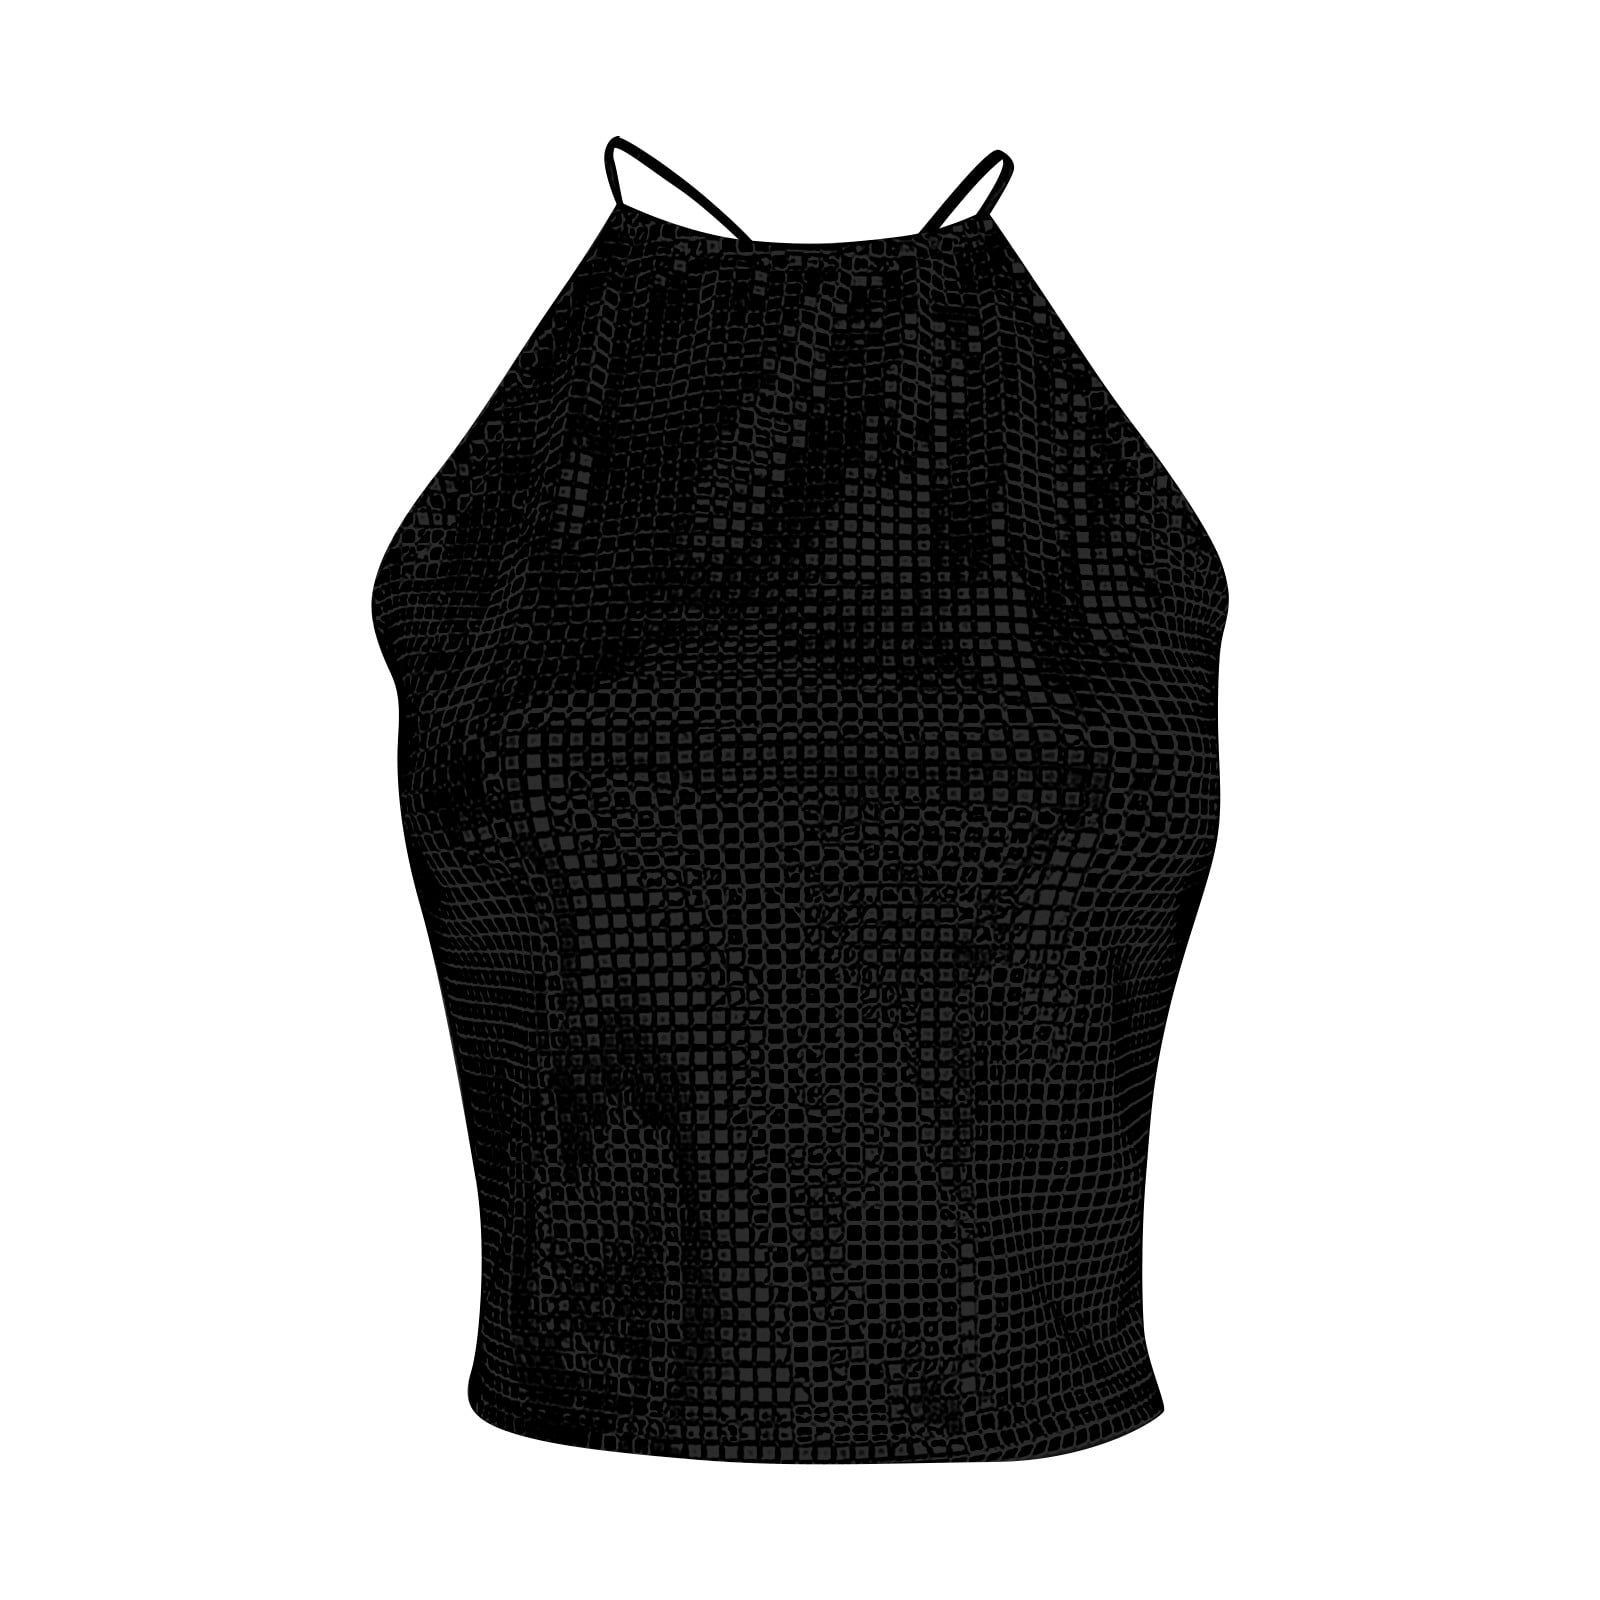 Aayomet Ladies Tops And Blouses Fashion Summer 2023 Women Women Top Shiny  Backless Casual Wear Women Top,Black M 